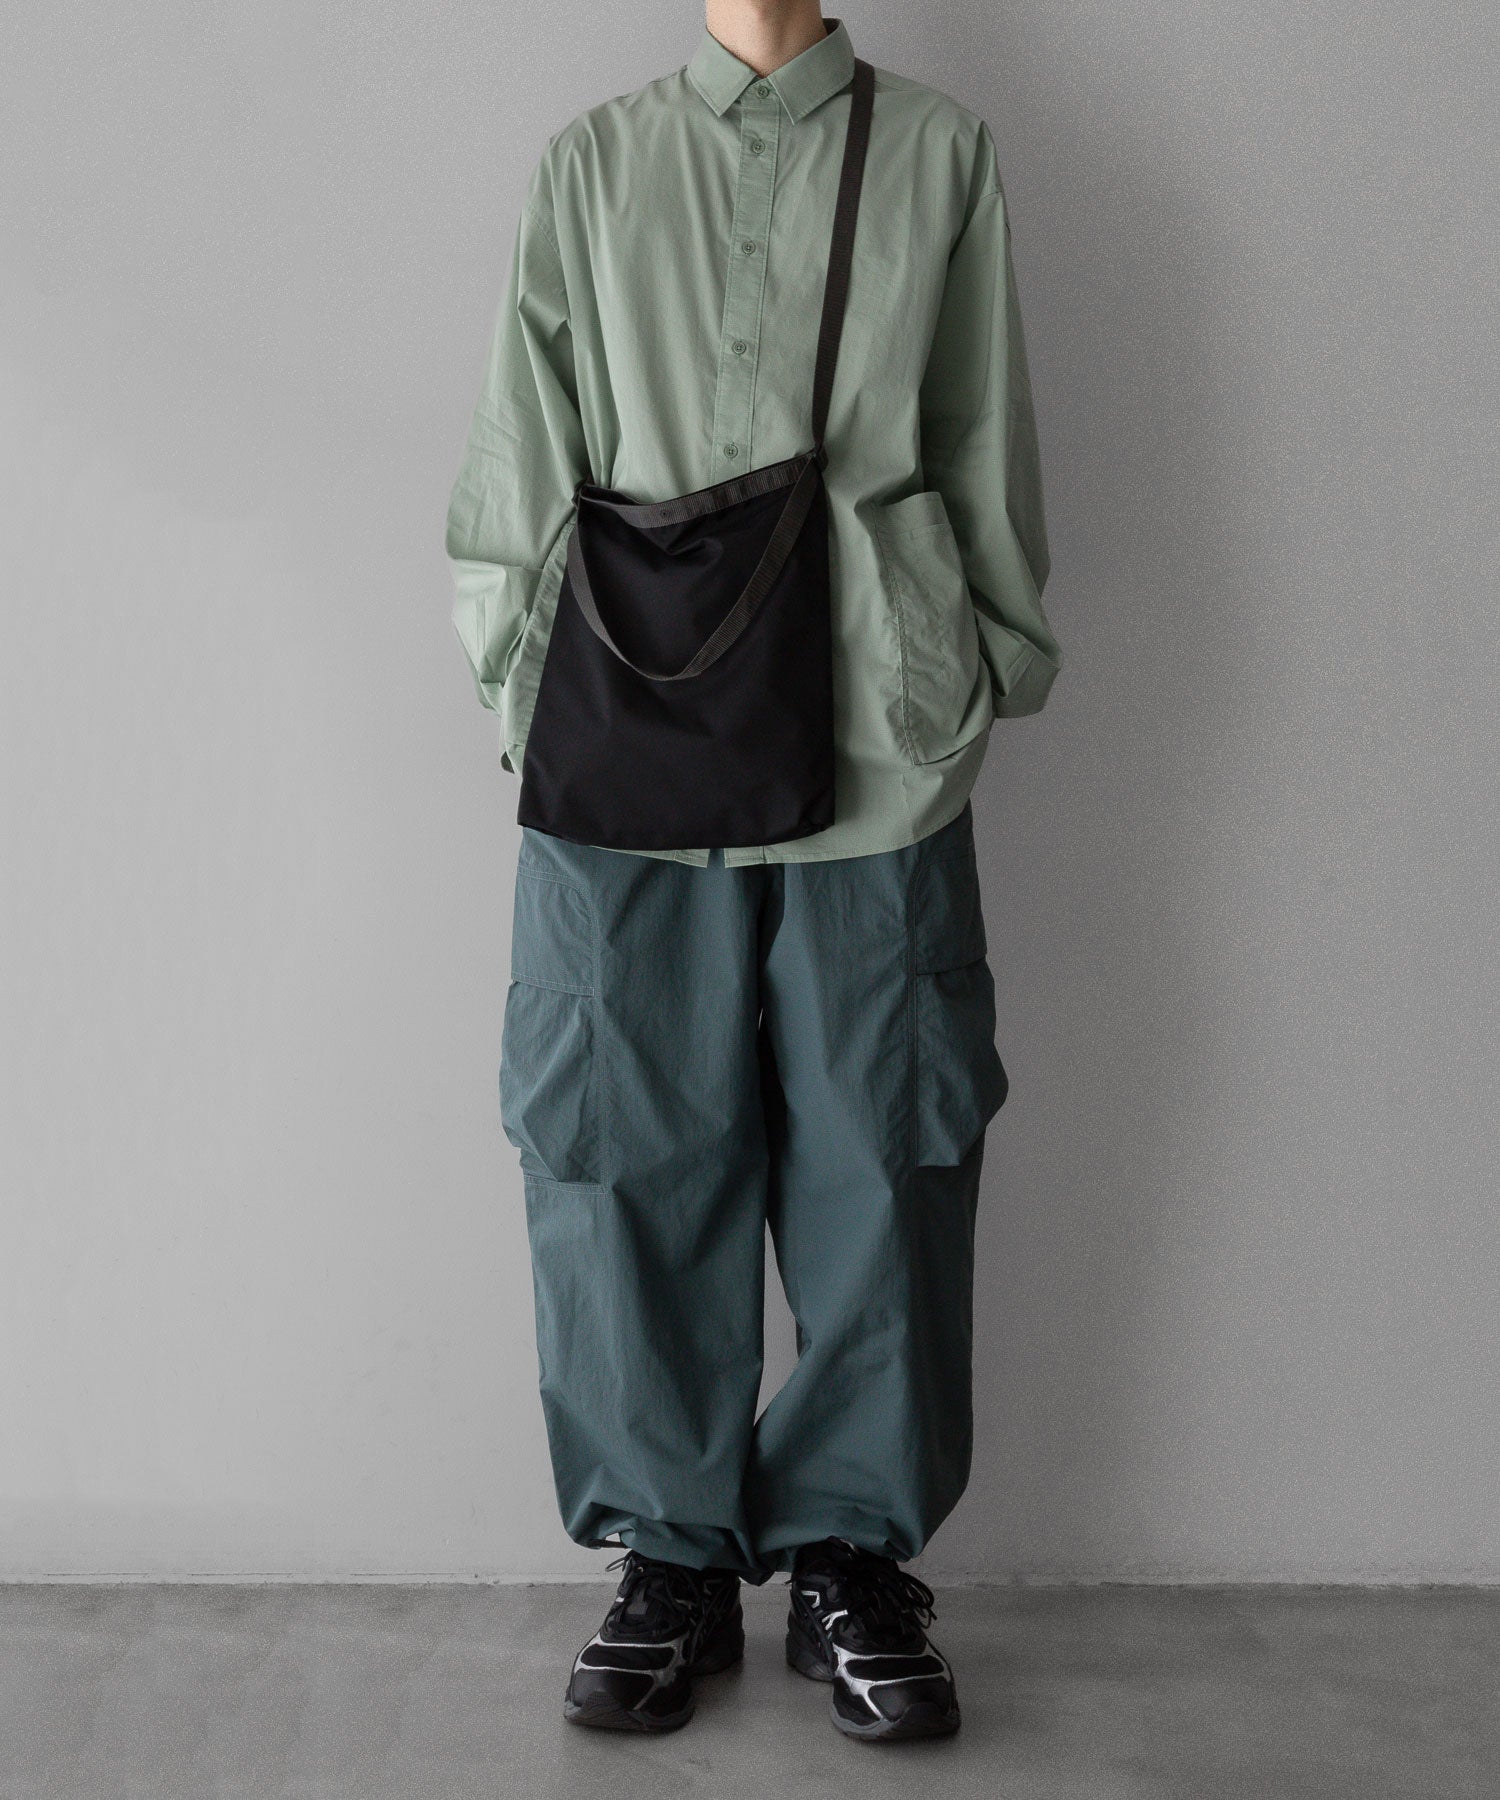 【NEITHERS】ネイダースのUNDERCOVER COACH PANTS - SAGE GREEN公式通販サイトsession福岡セレクトショップ